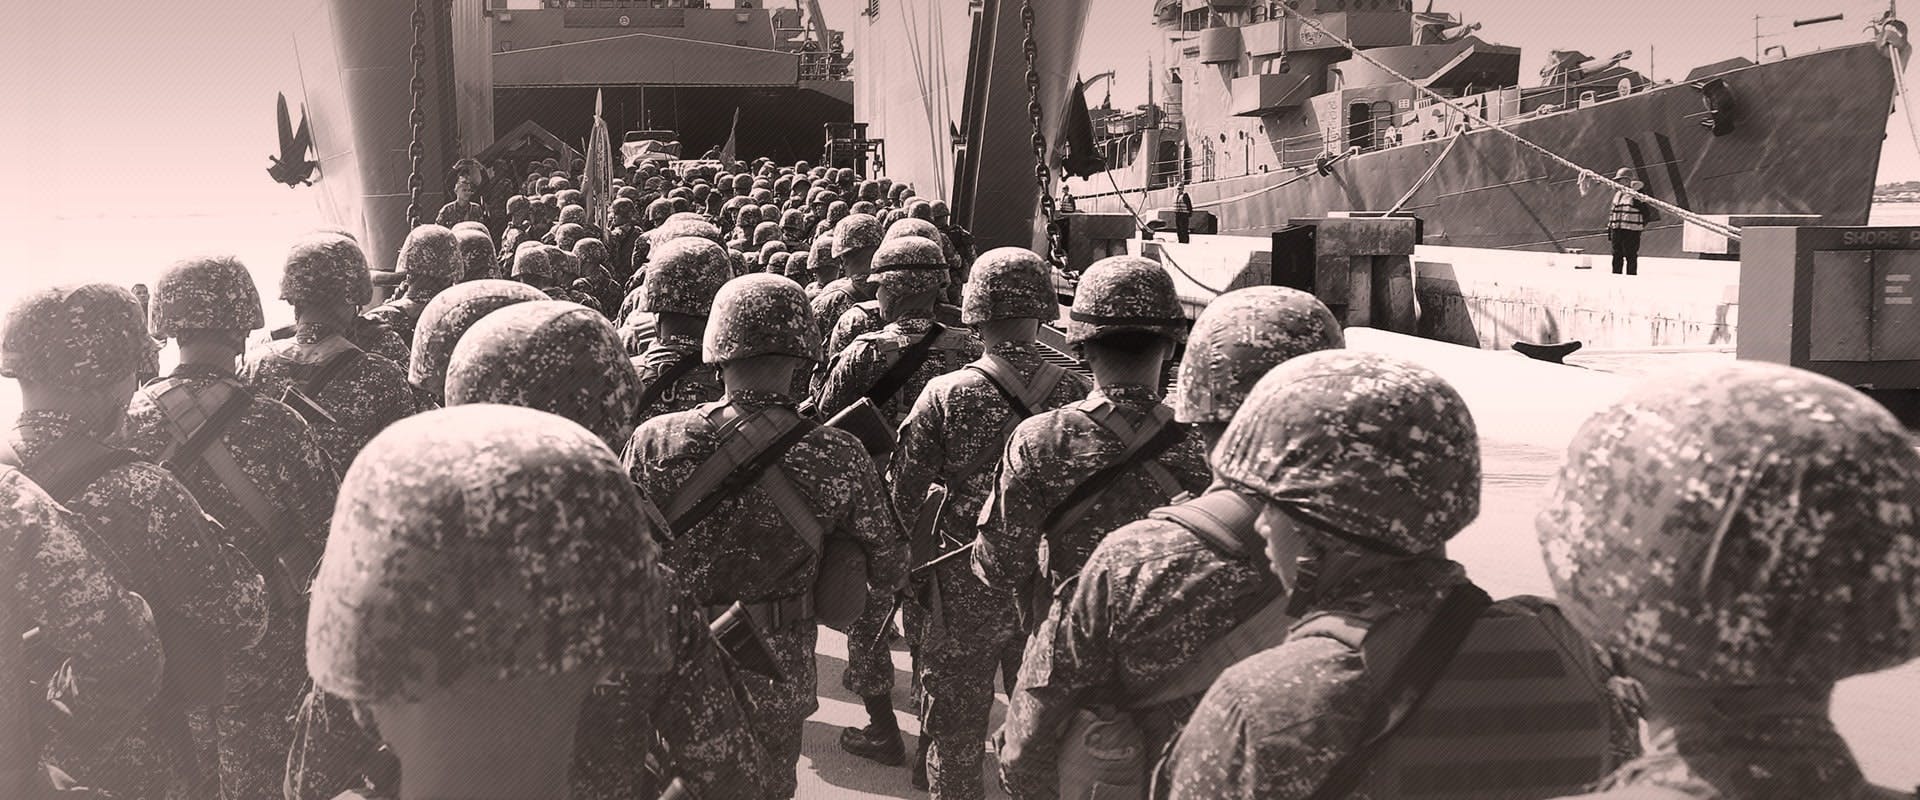 A group of soldiers in uniform and helmets, seen from behind, boarding or standing near a large ship. The uniforms have a distinct camouflaged pattern. 